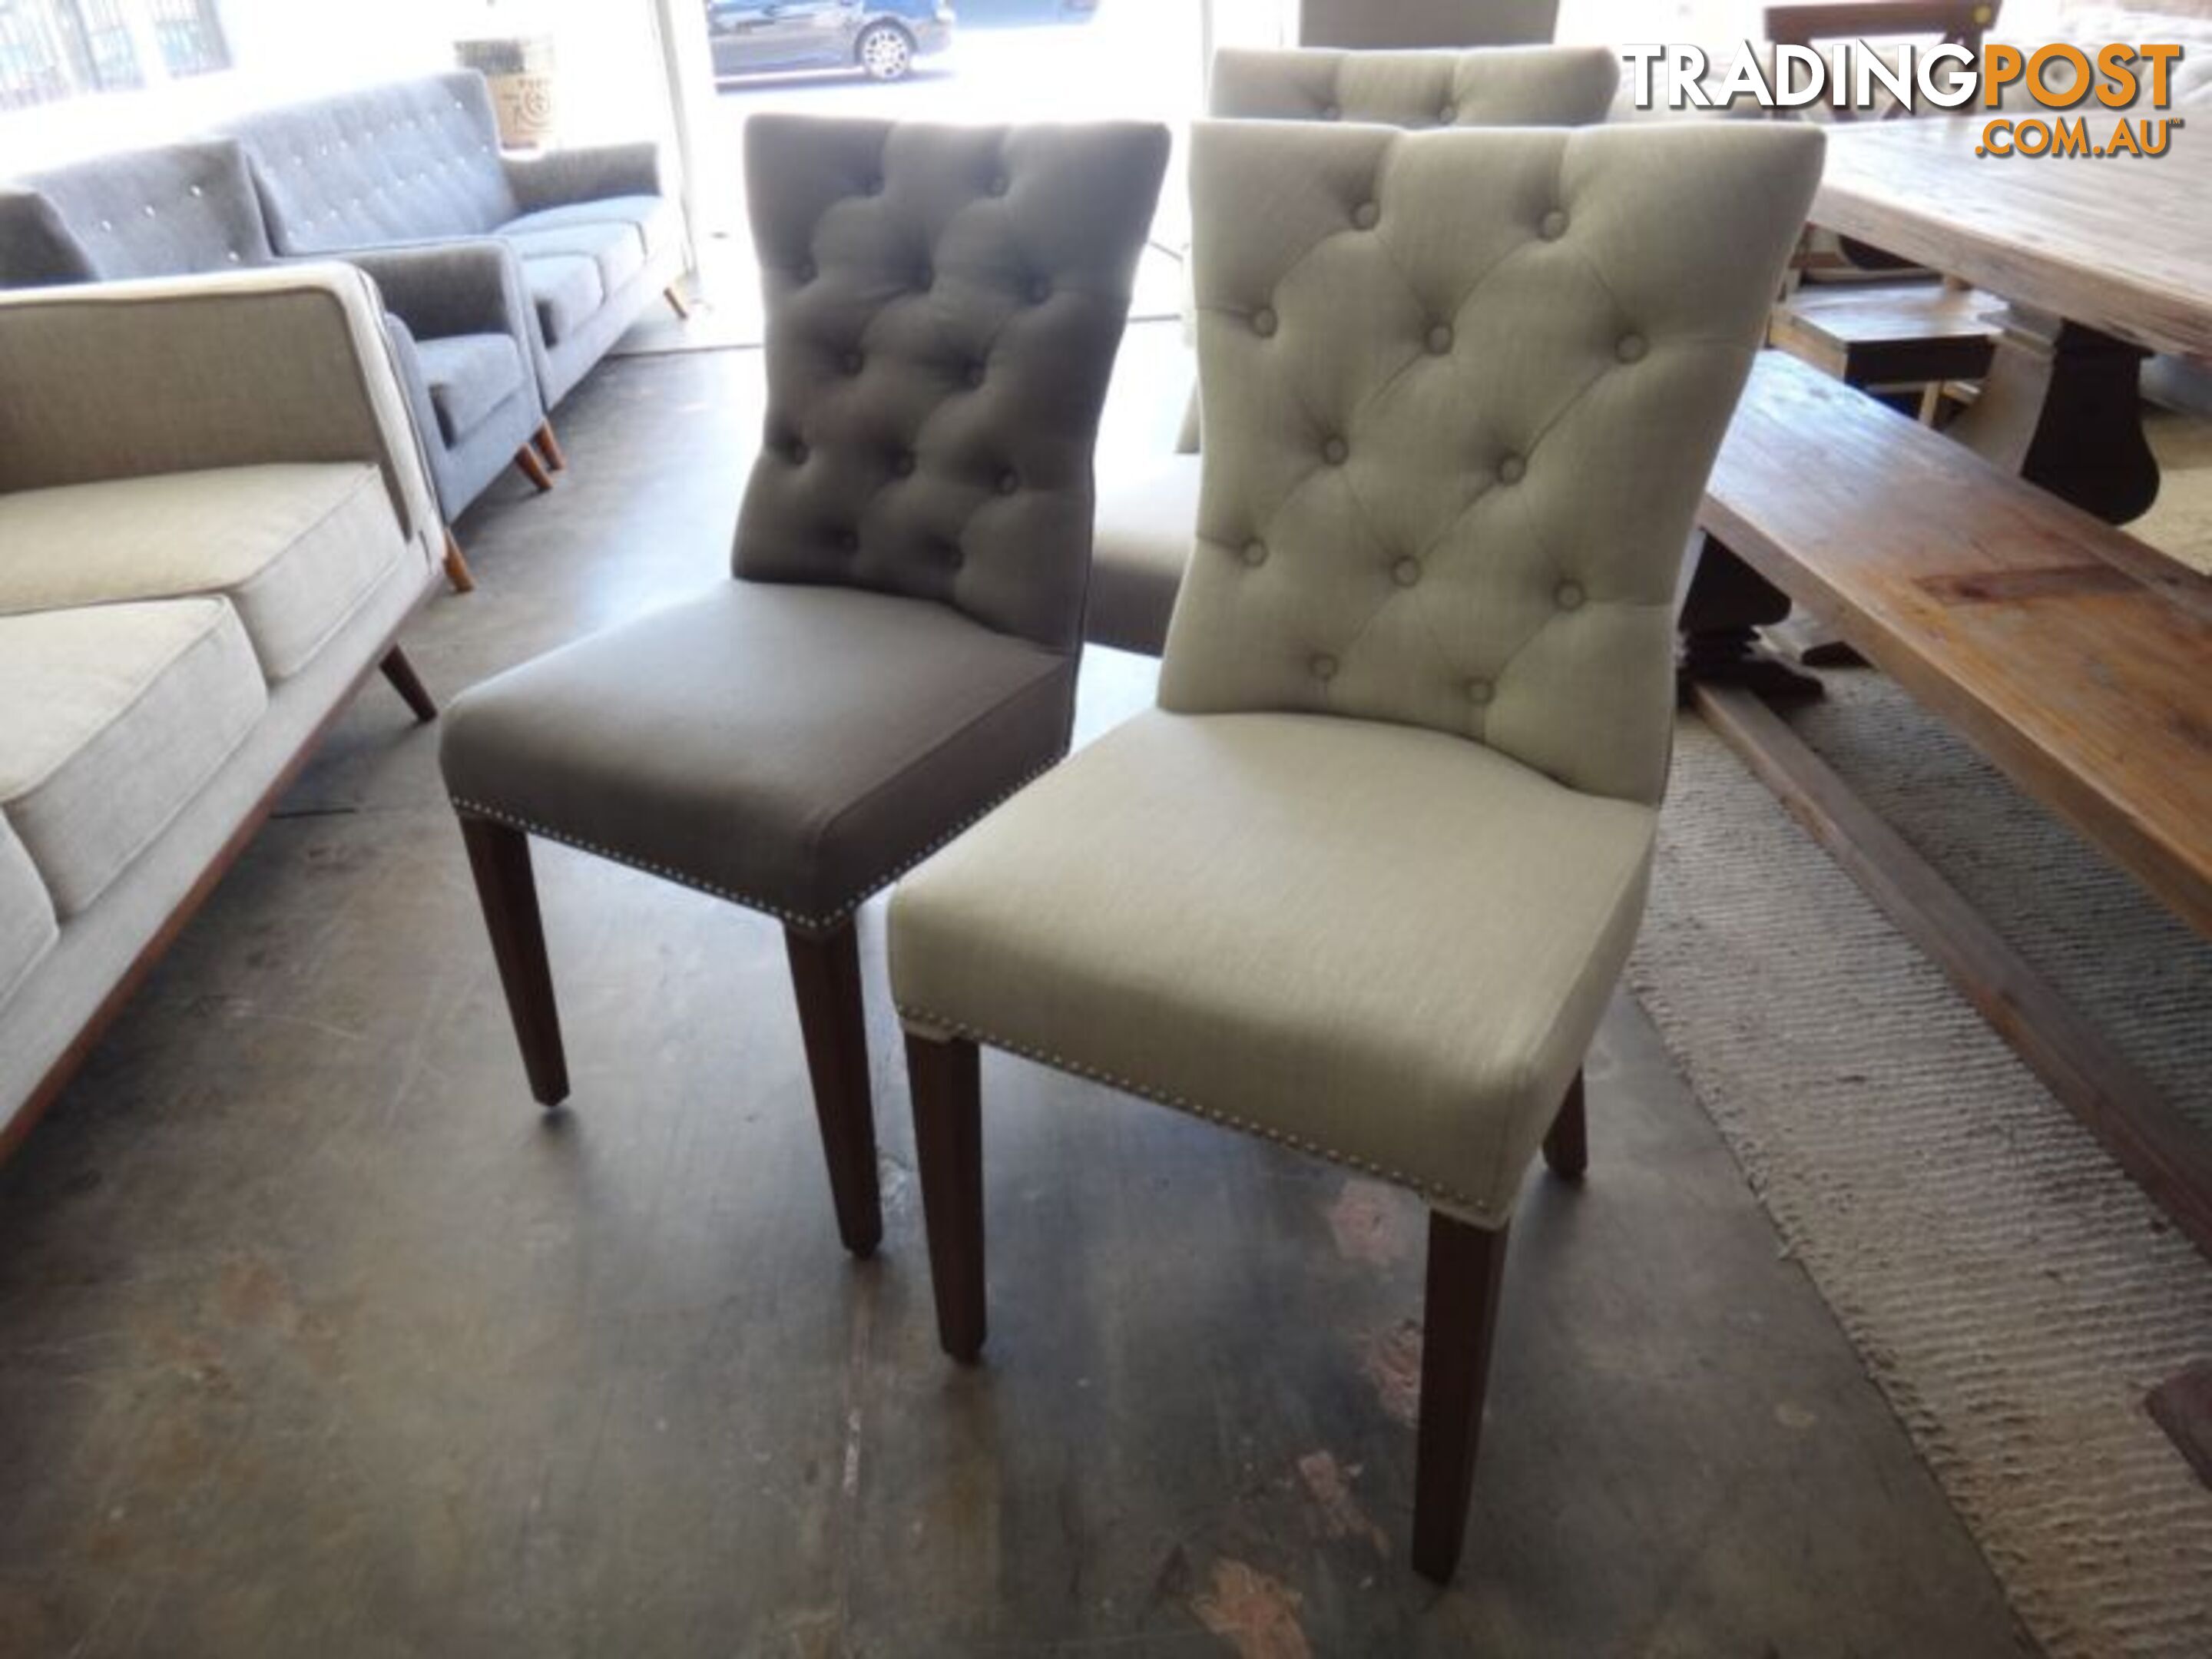 NEW VICTORIA DINING CHAIRS - 2 COLOURS AVAILABLE